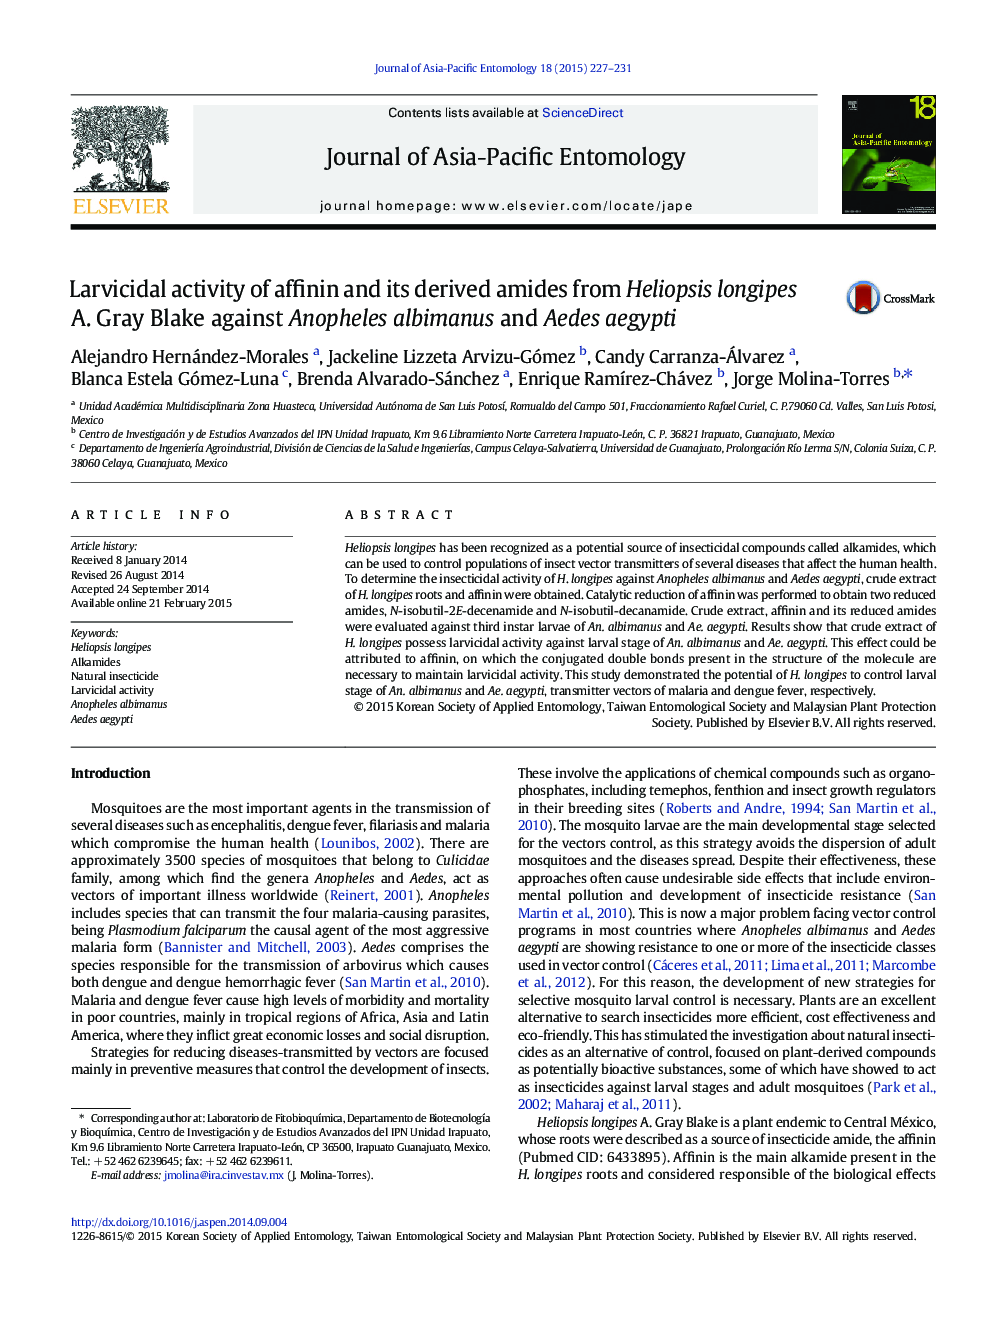 Larvicidal activity of affinin and its derived amides from Heliopsis longipes A. Gray Blake against Anopheles albimanus and Aedes aegypti